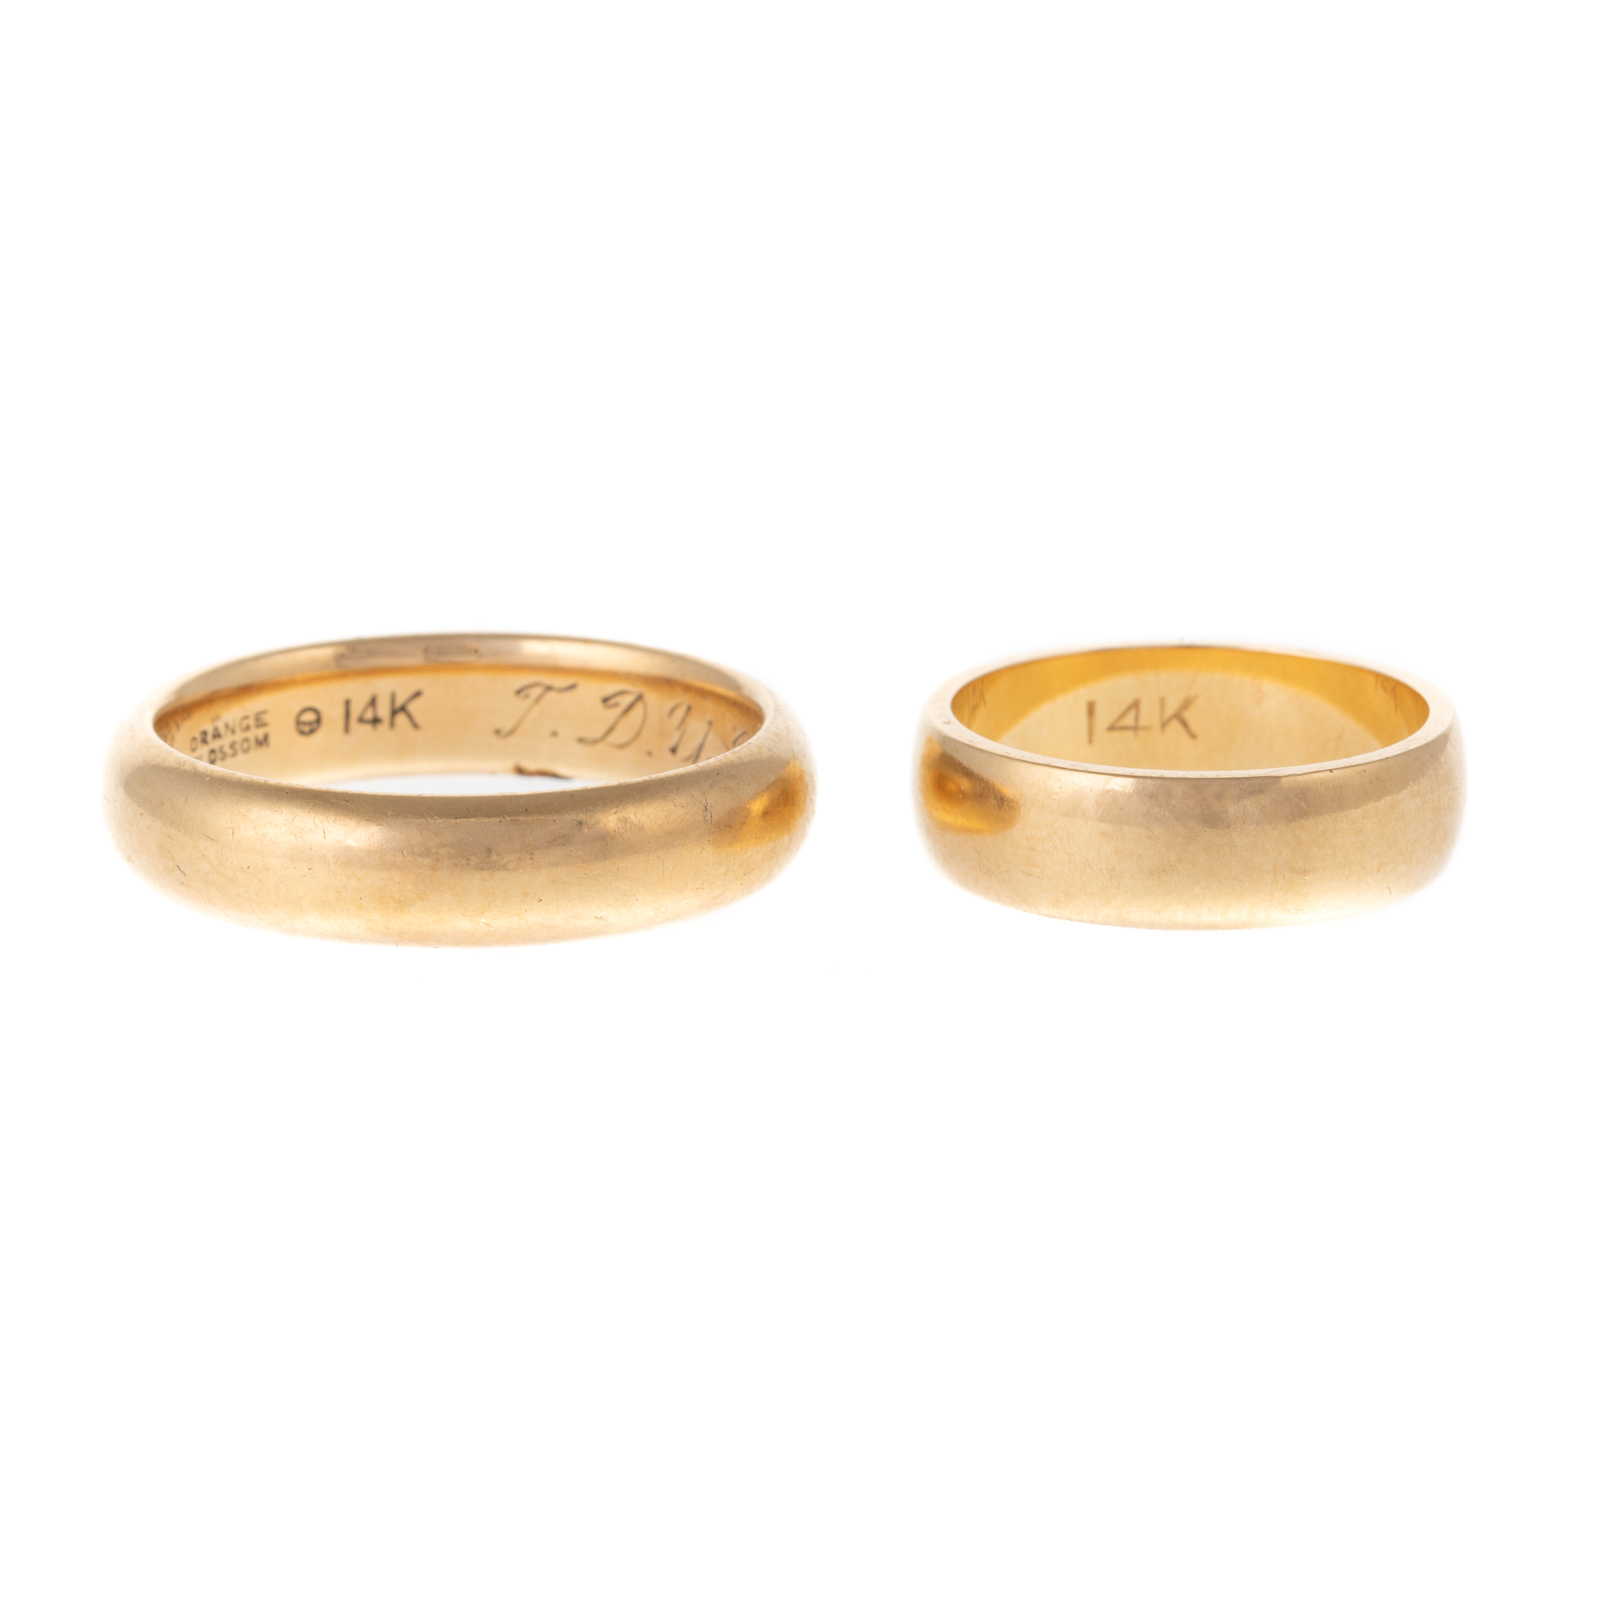 A PAIR OF VINTAGE 14K WEDDING BANDS